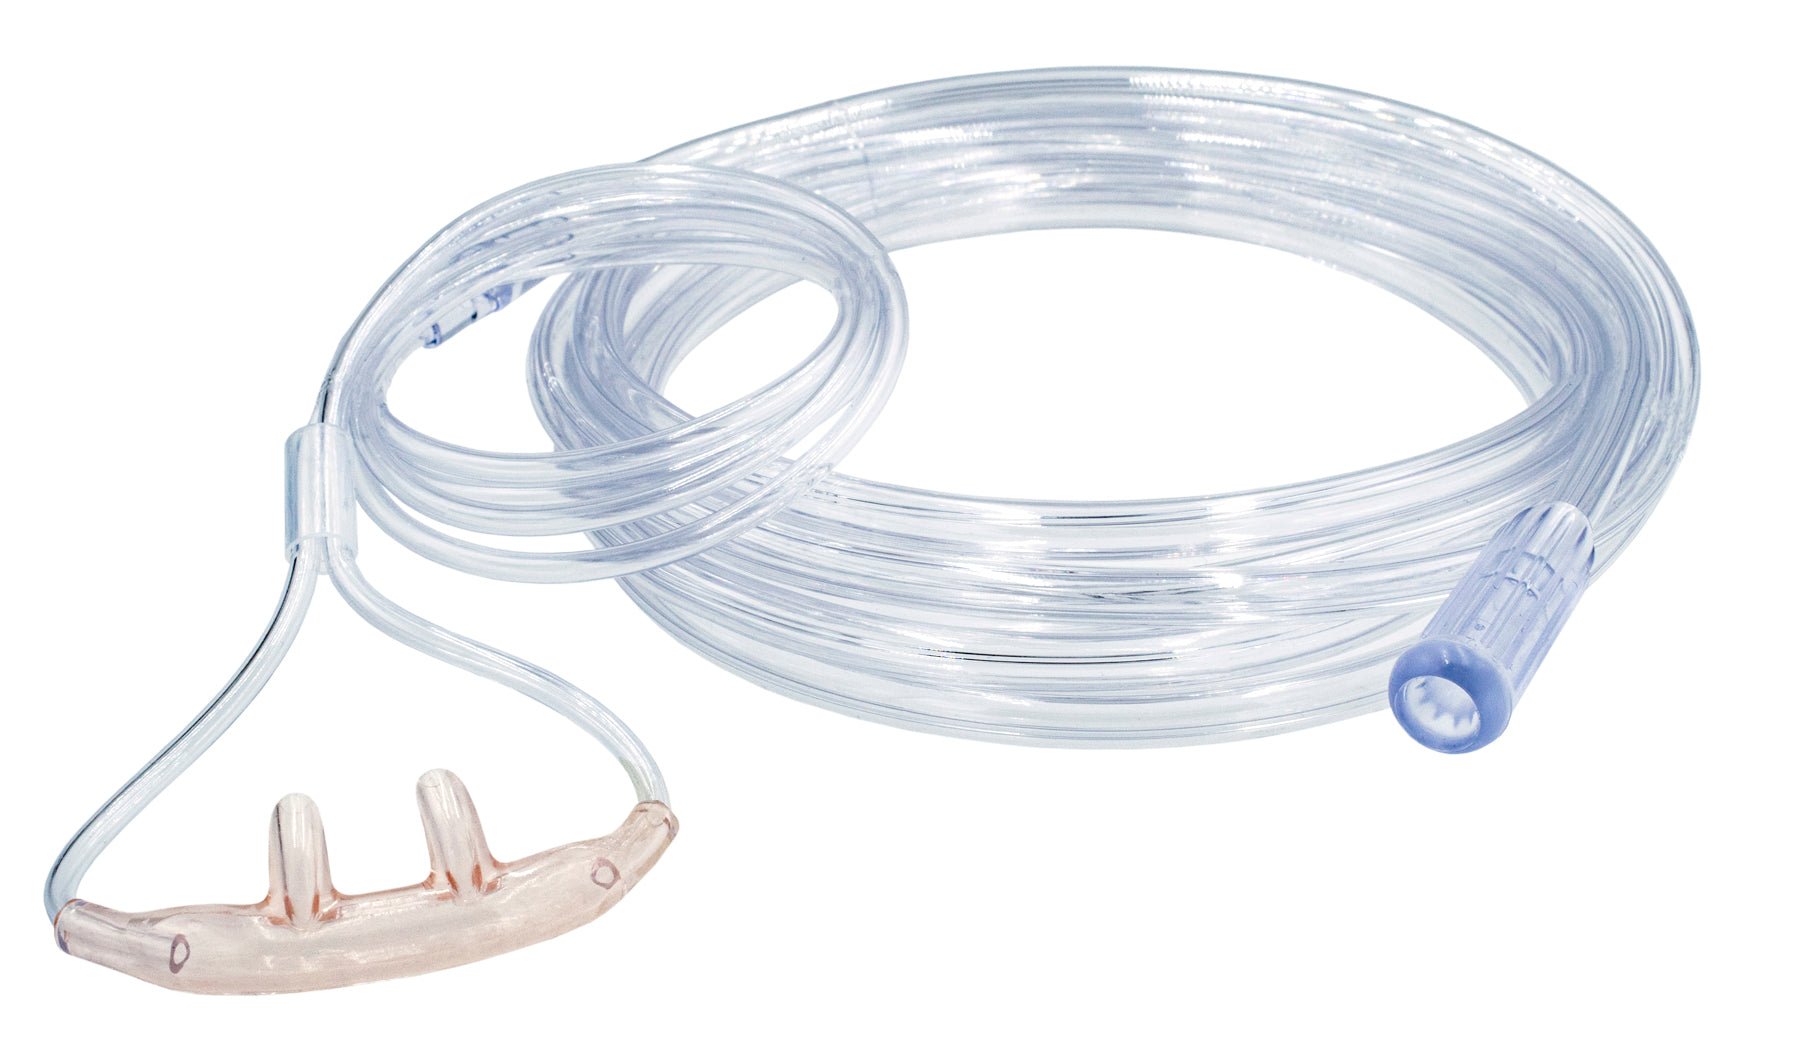 EA/1 - Salter Labs Original Cannula with 7 ft Clear Supply Tube - Best Buy Medical Supplies